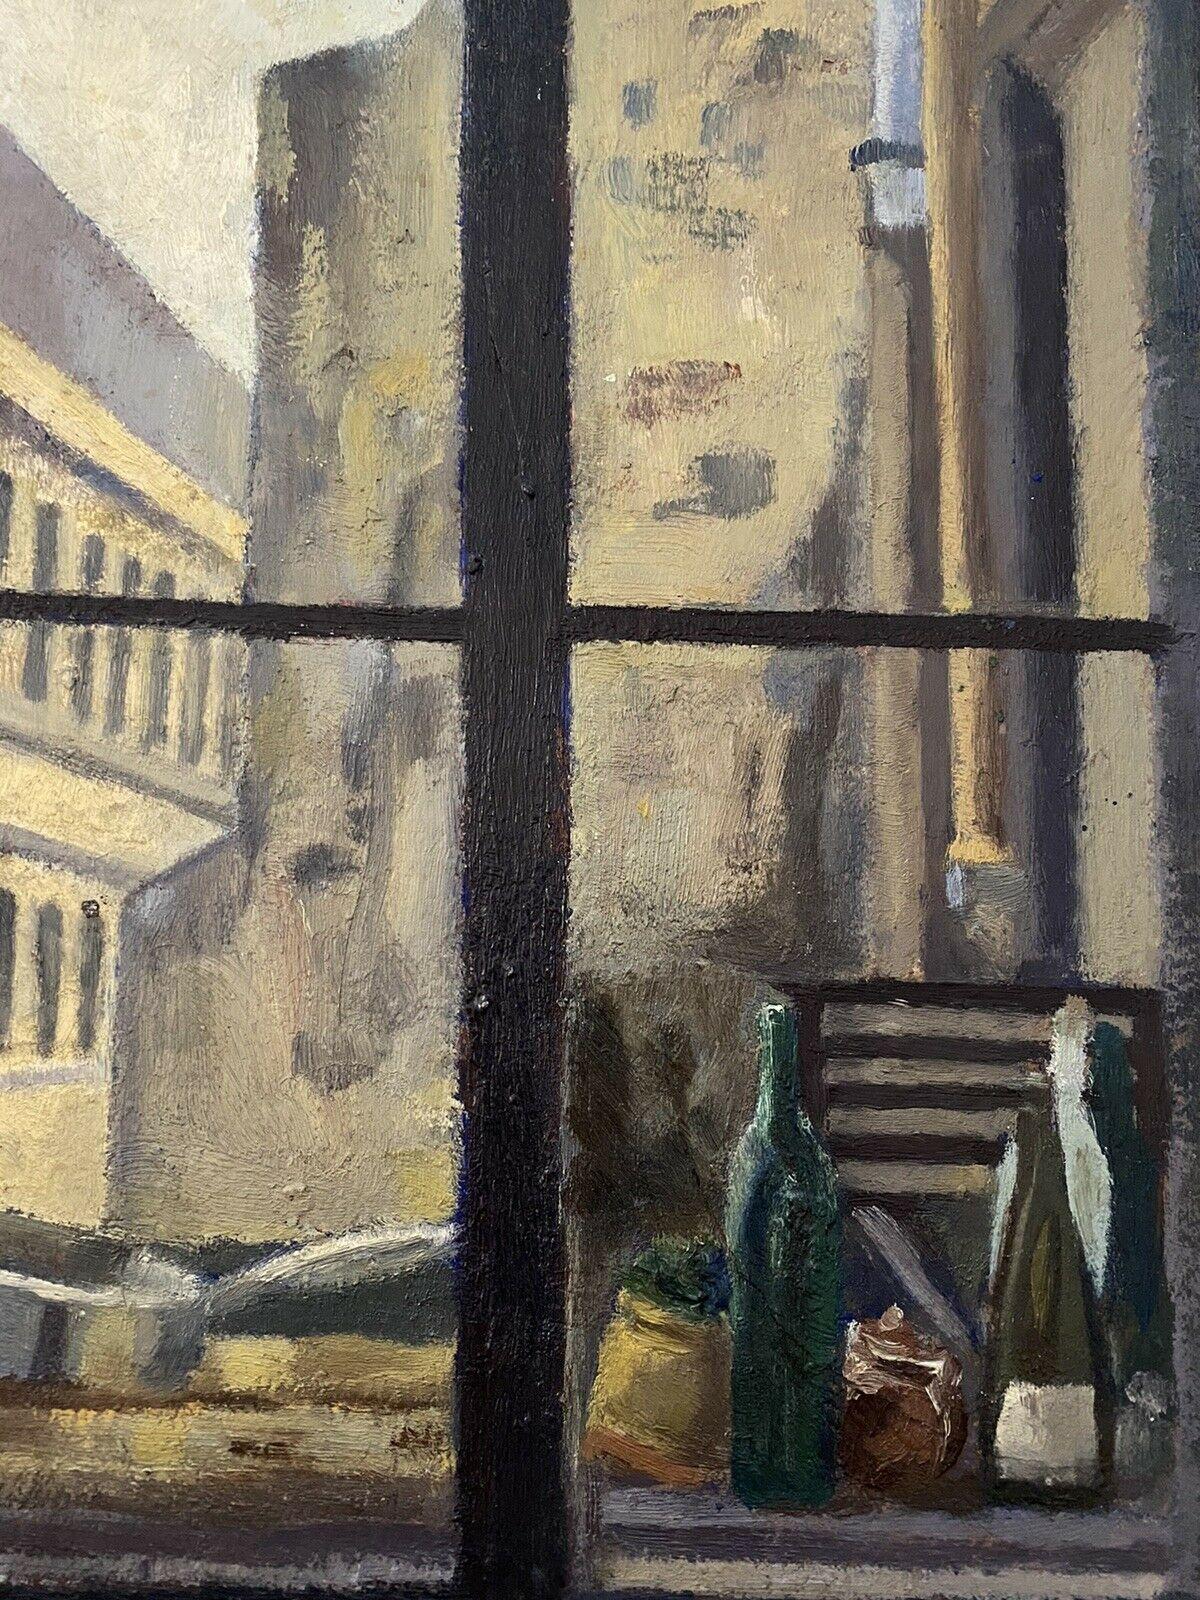 MID CENTURY FRENCH OIL PAINTING - VIEW FROM INSIDE WINDOW - WINE BOTTLES - Painting by GENEVIEVE ZONDERVAN (1922-2013)